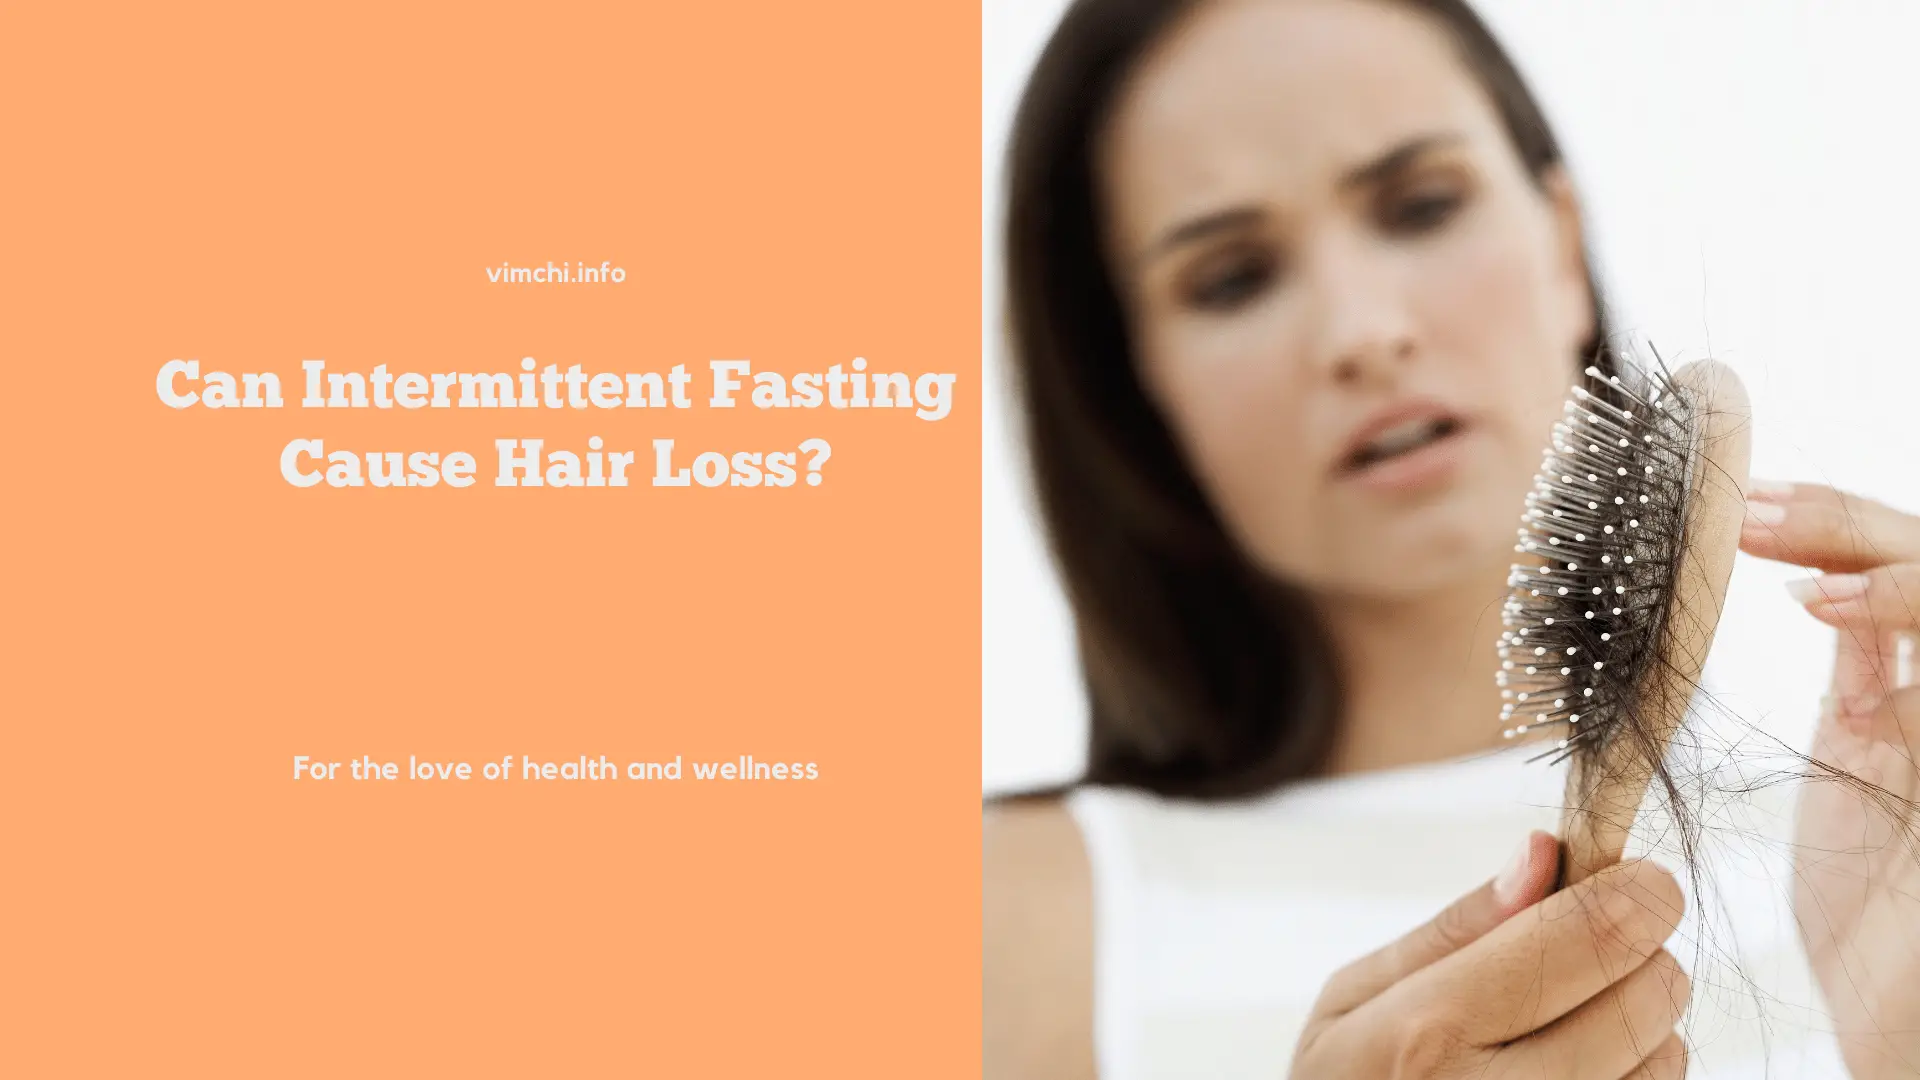 Aggregate more than 65 hair loss intermittent fasting - in.eteachers